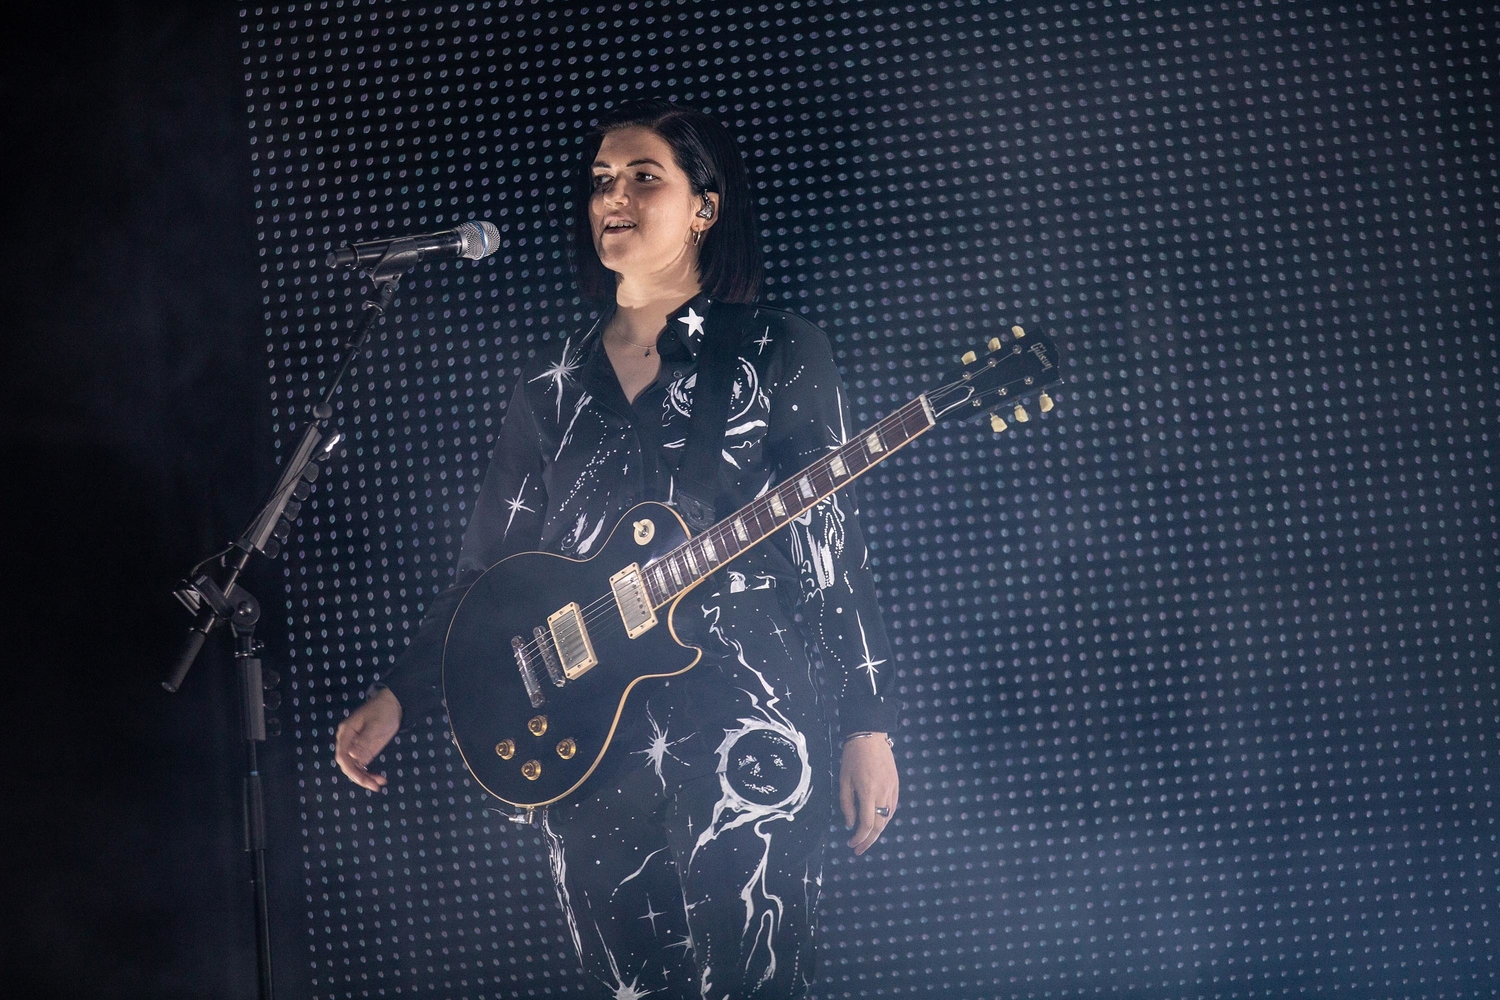 The xx and Lorde bring emotional hammerblows to an electrifying second day of All Points East